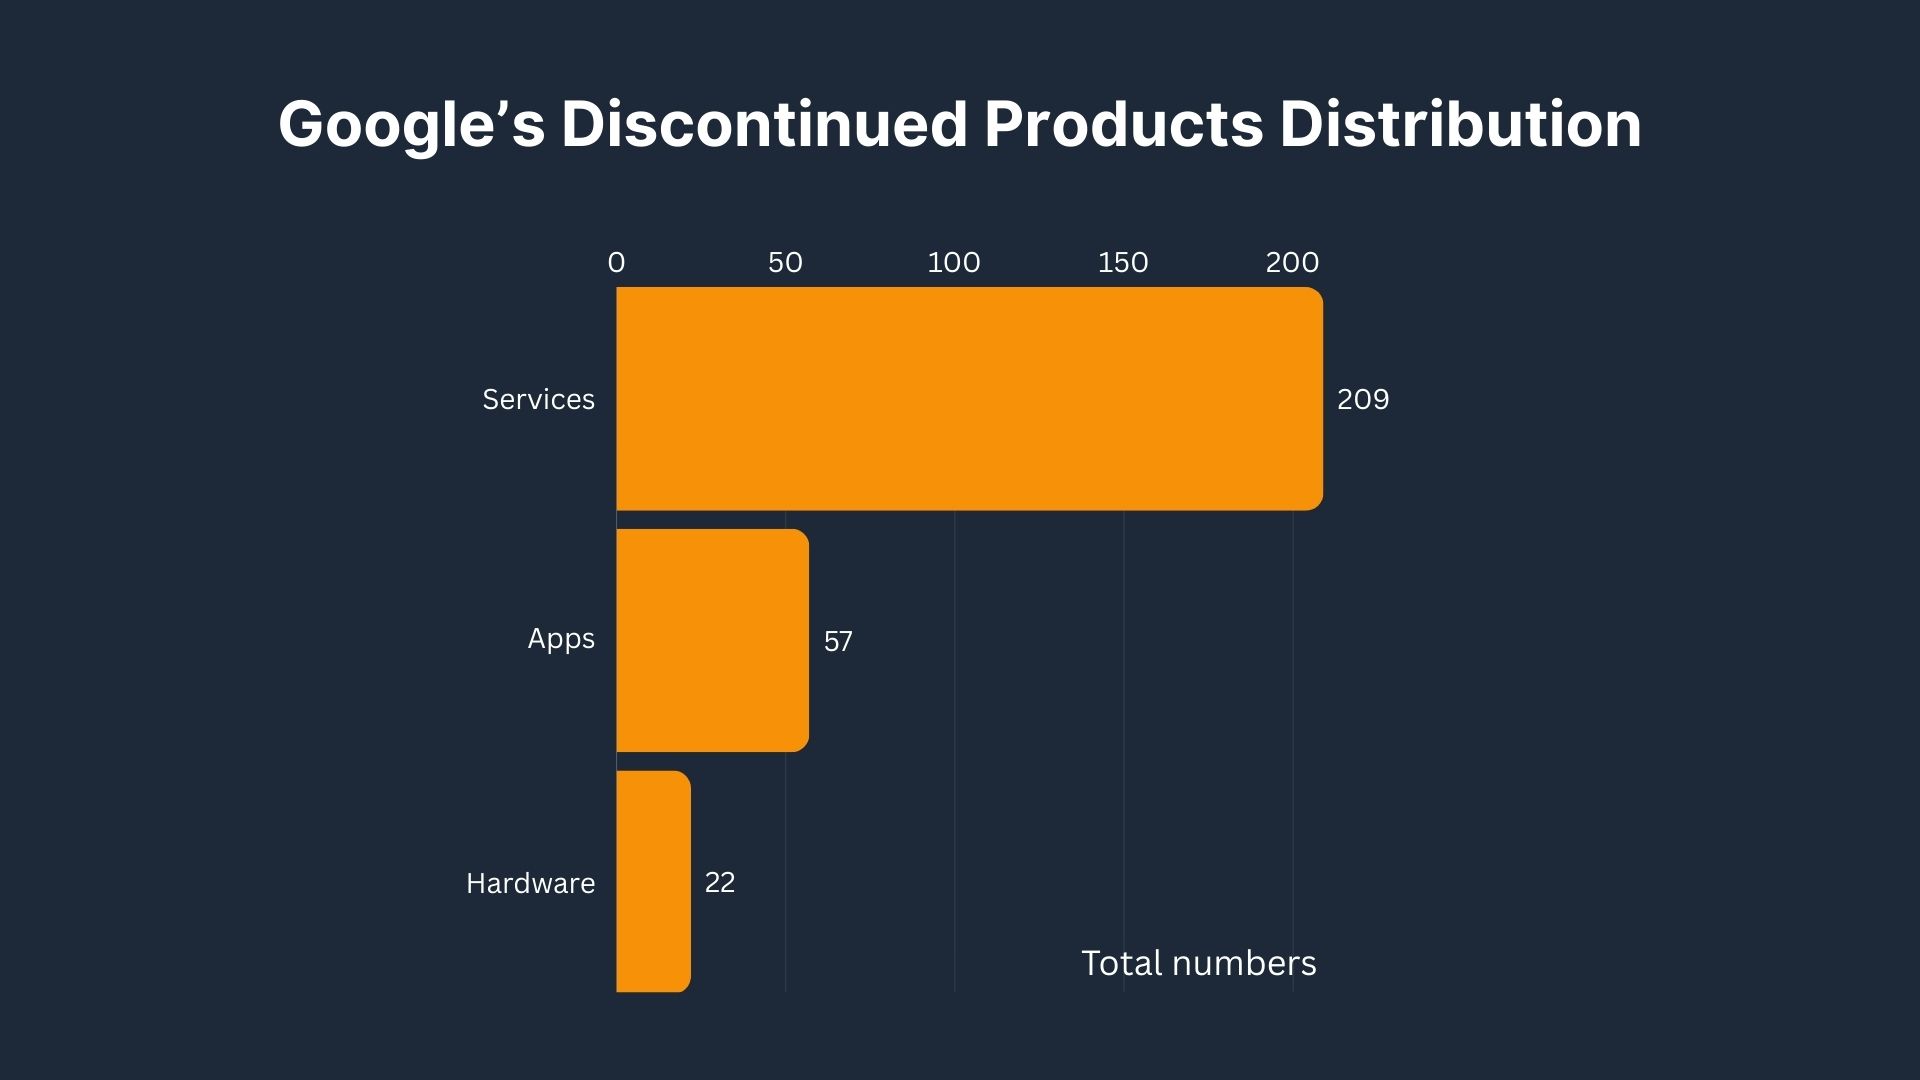 Google’s Discontinued Products Distribution
